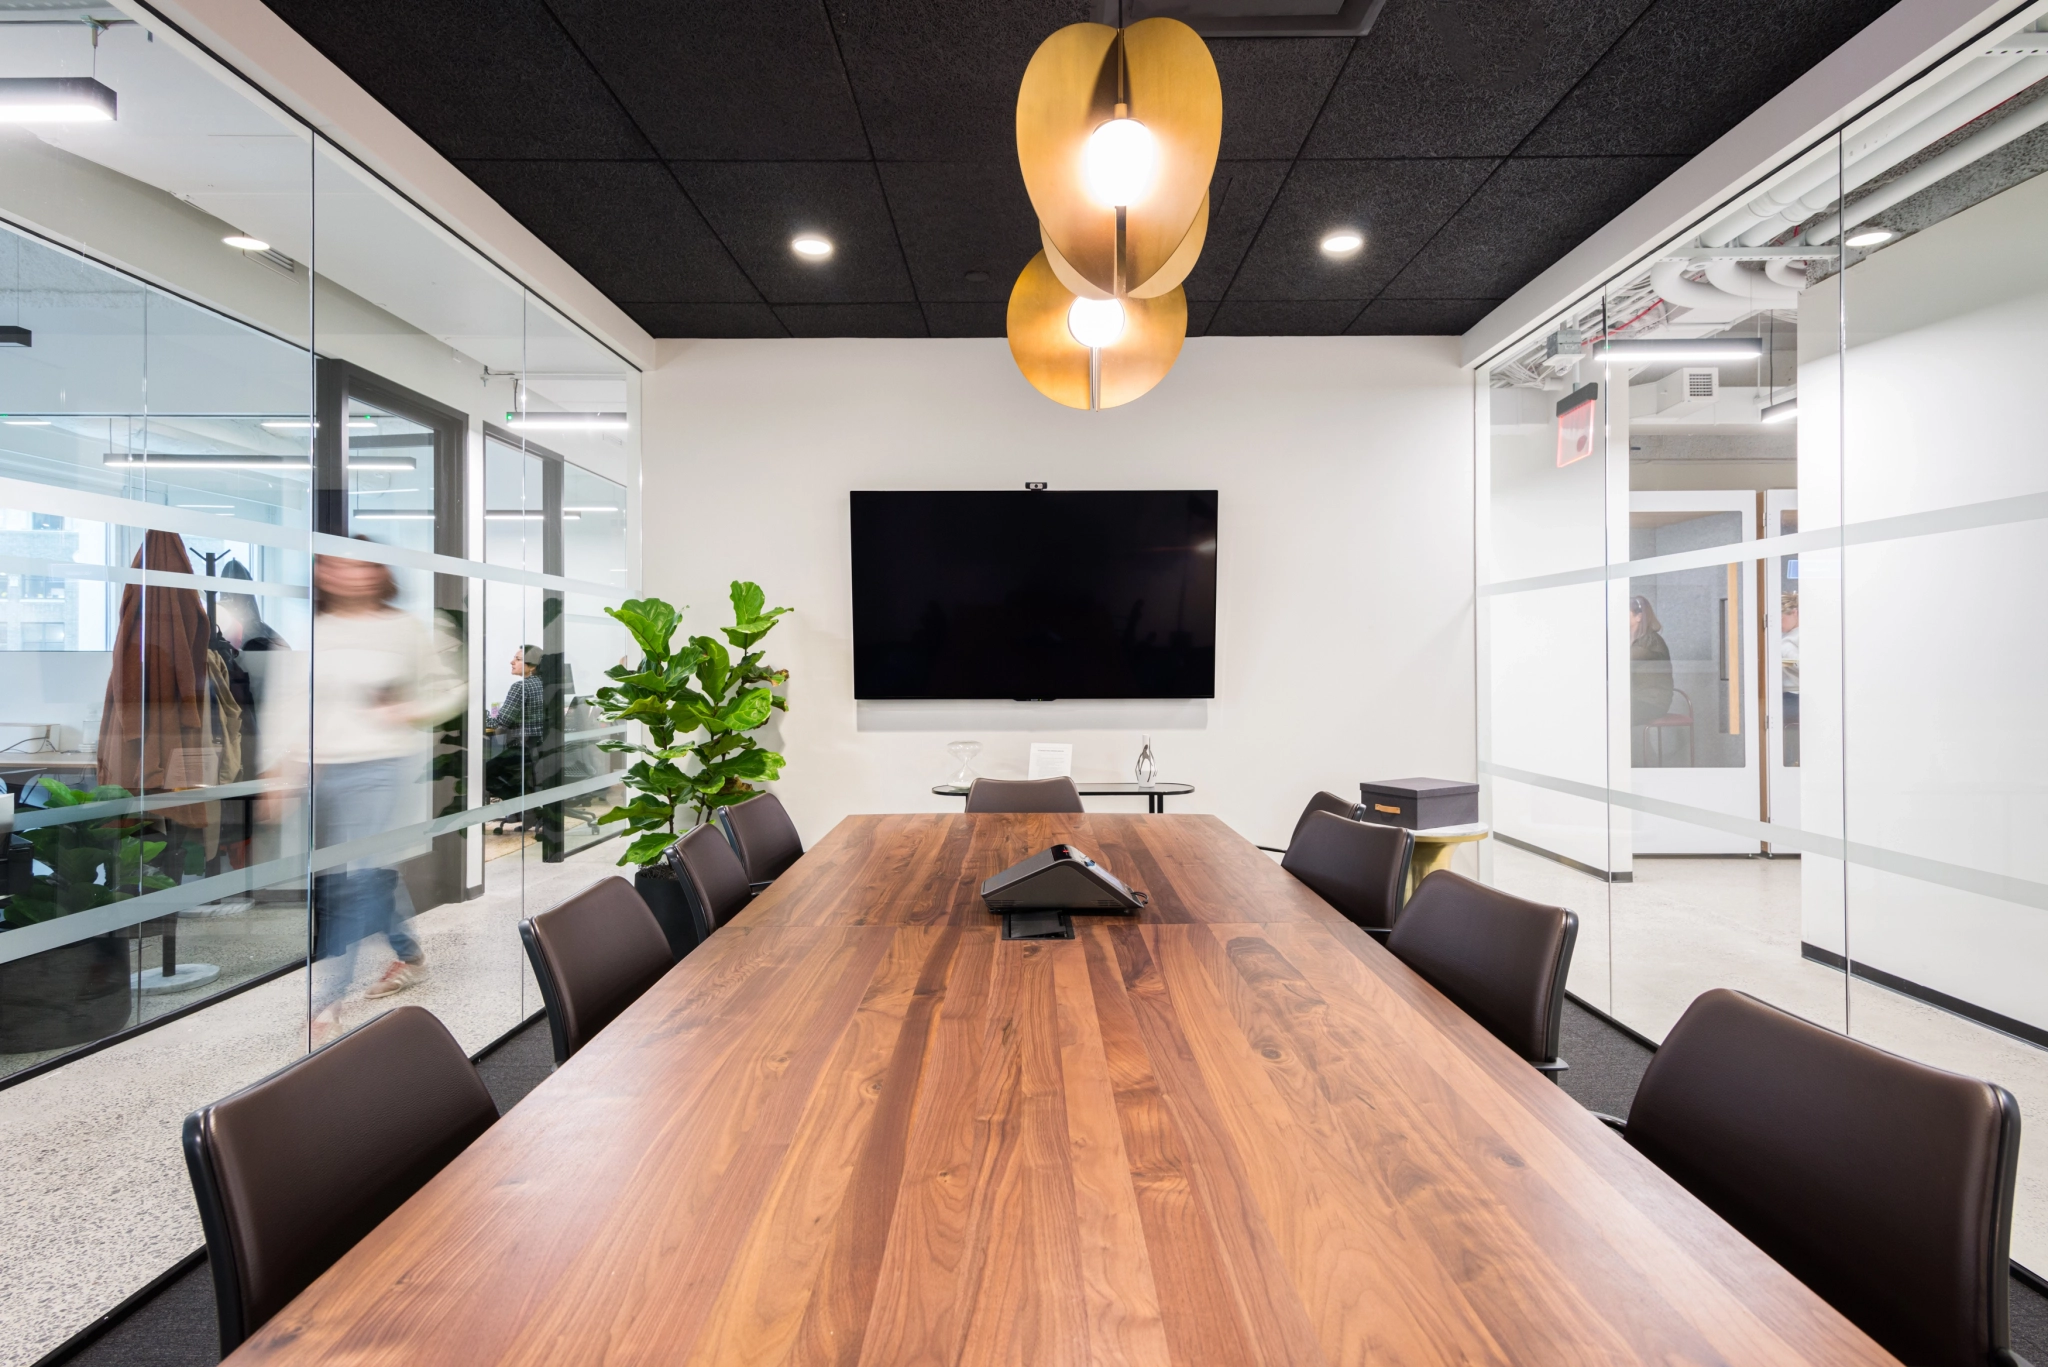 A modern conference room in Los Angeles with a long wooden table, black chairs, a wall-mounted TV, and hanging lights. Glass walls reveal an adjacent coworking meeting room and a blurred figure walking by.